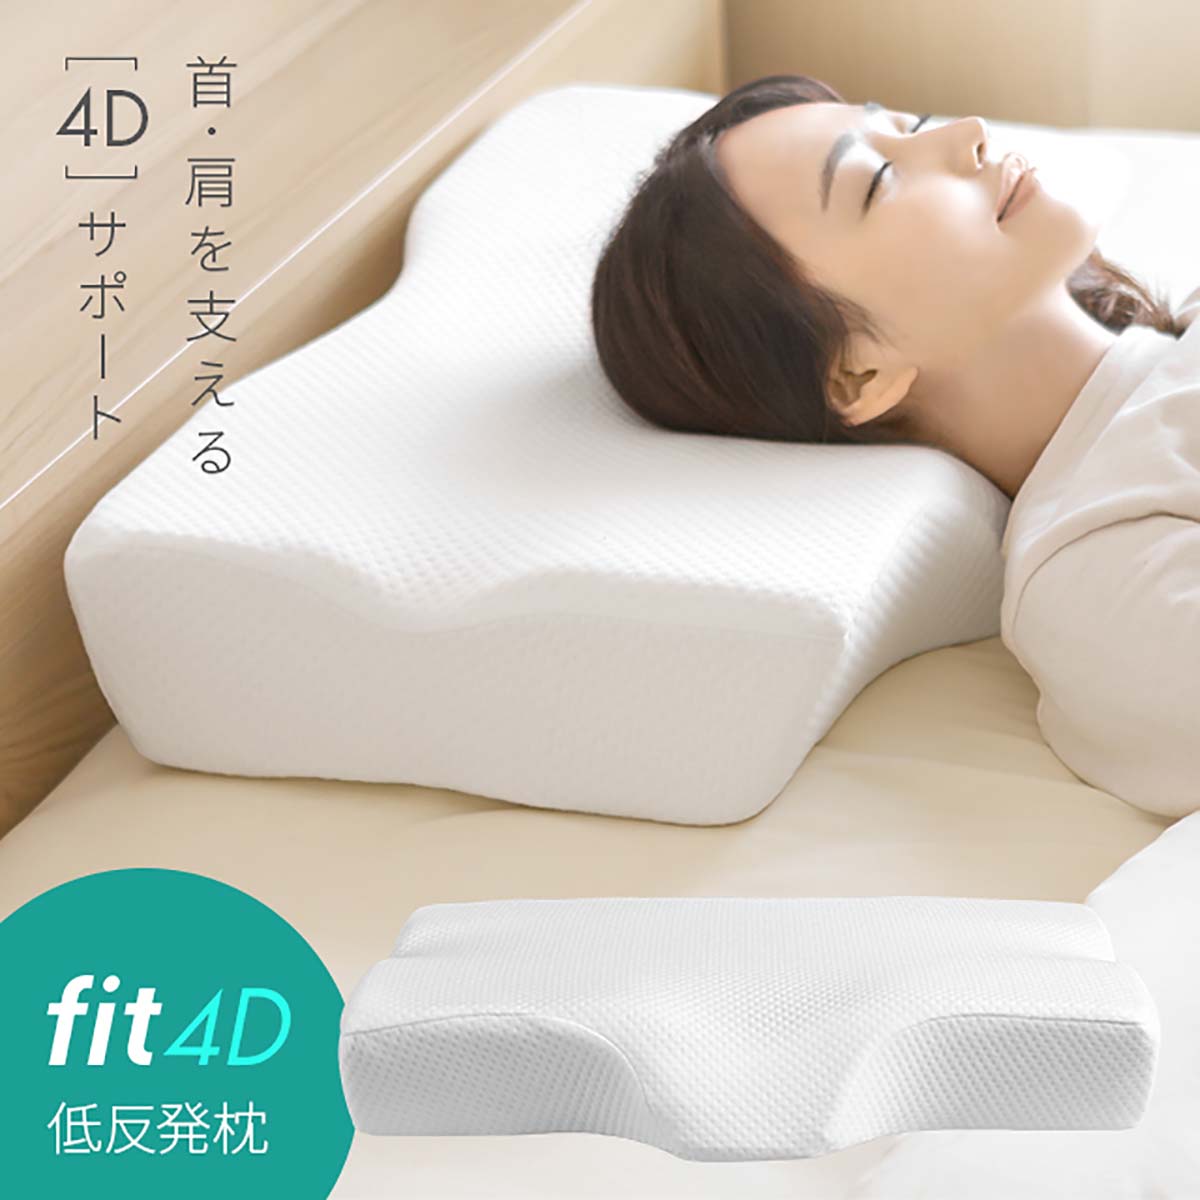 Best paired together with our Nuloft 4D Fit Memory Foam Pillow